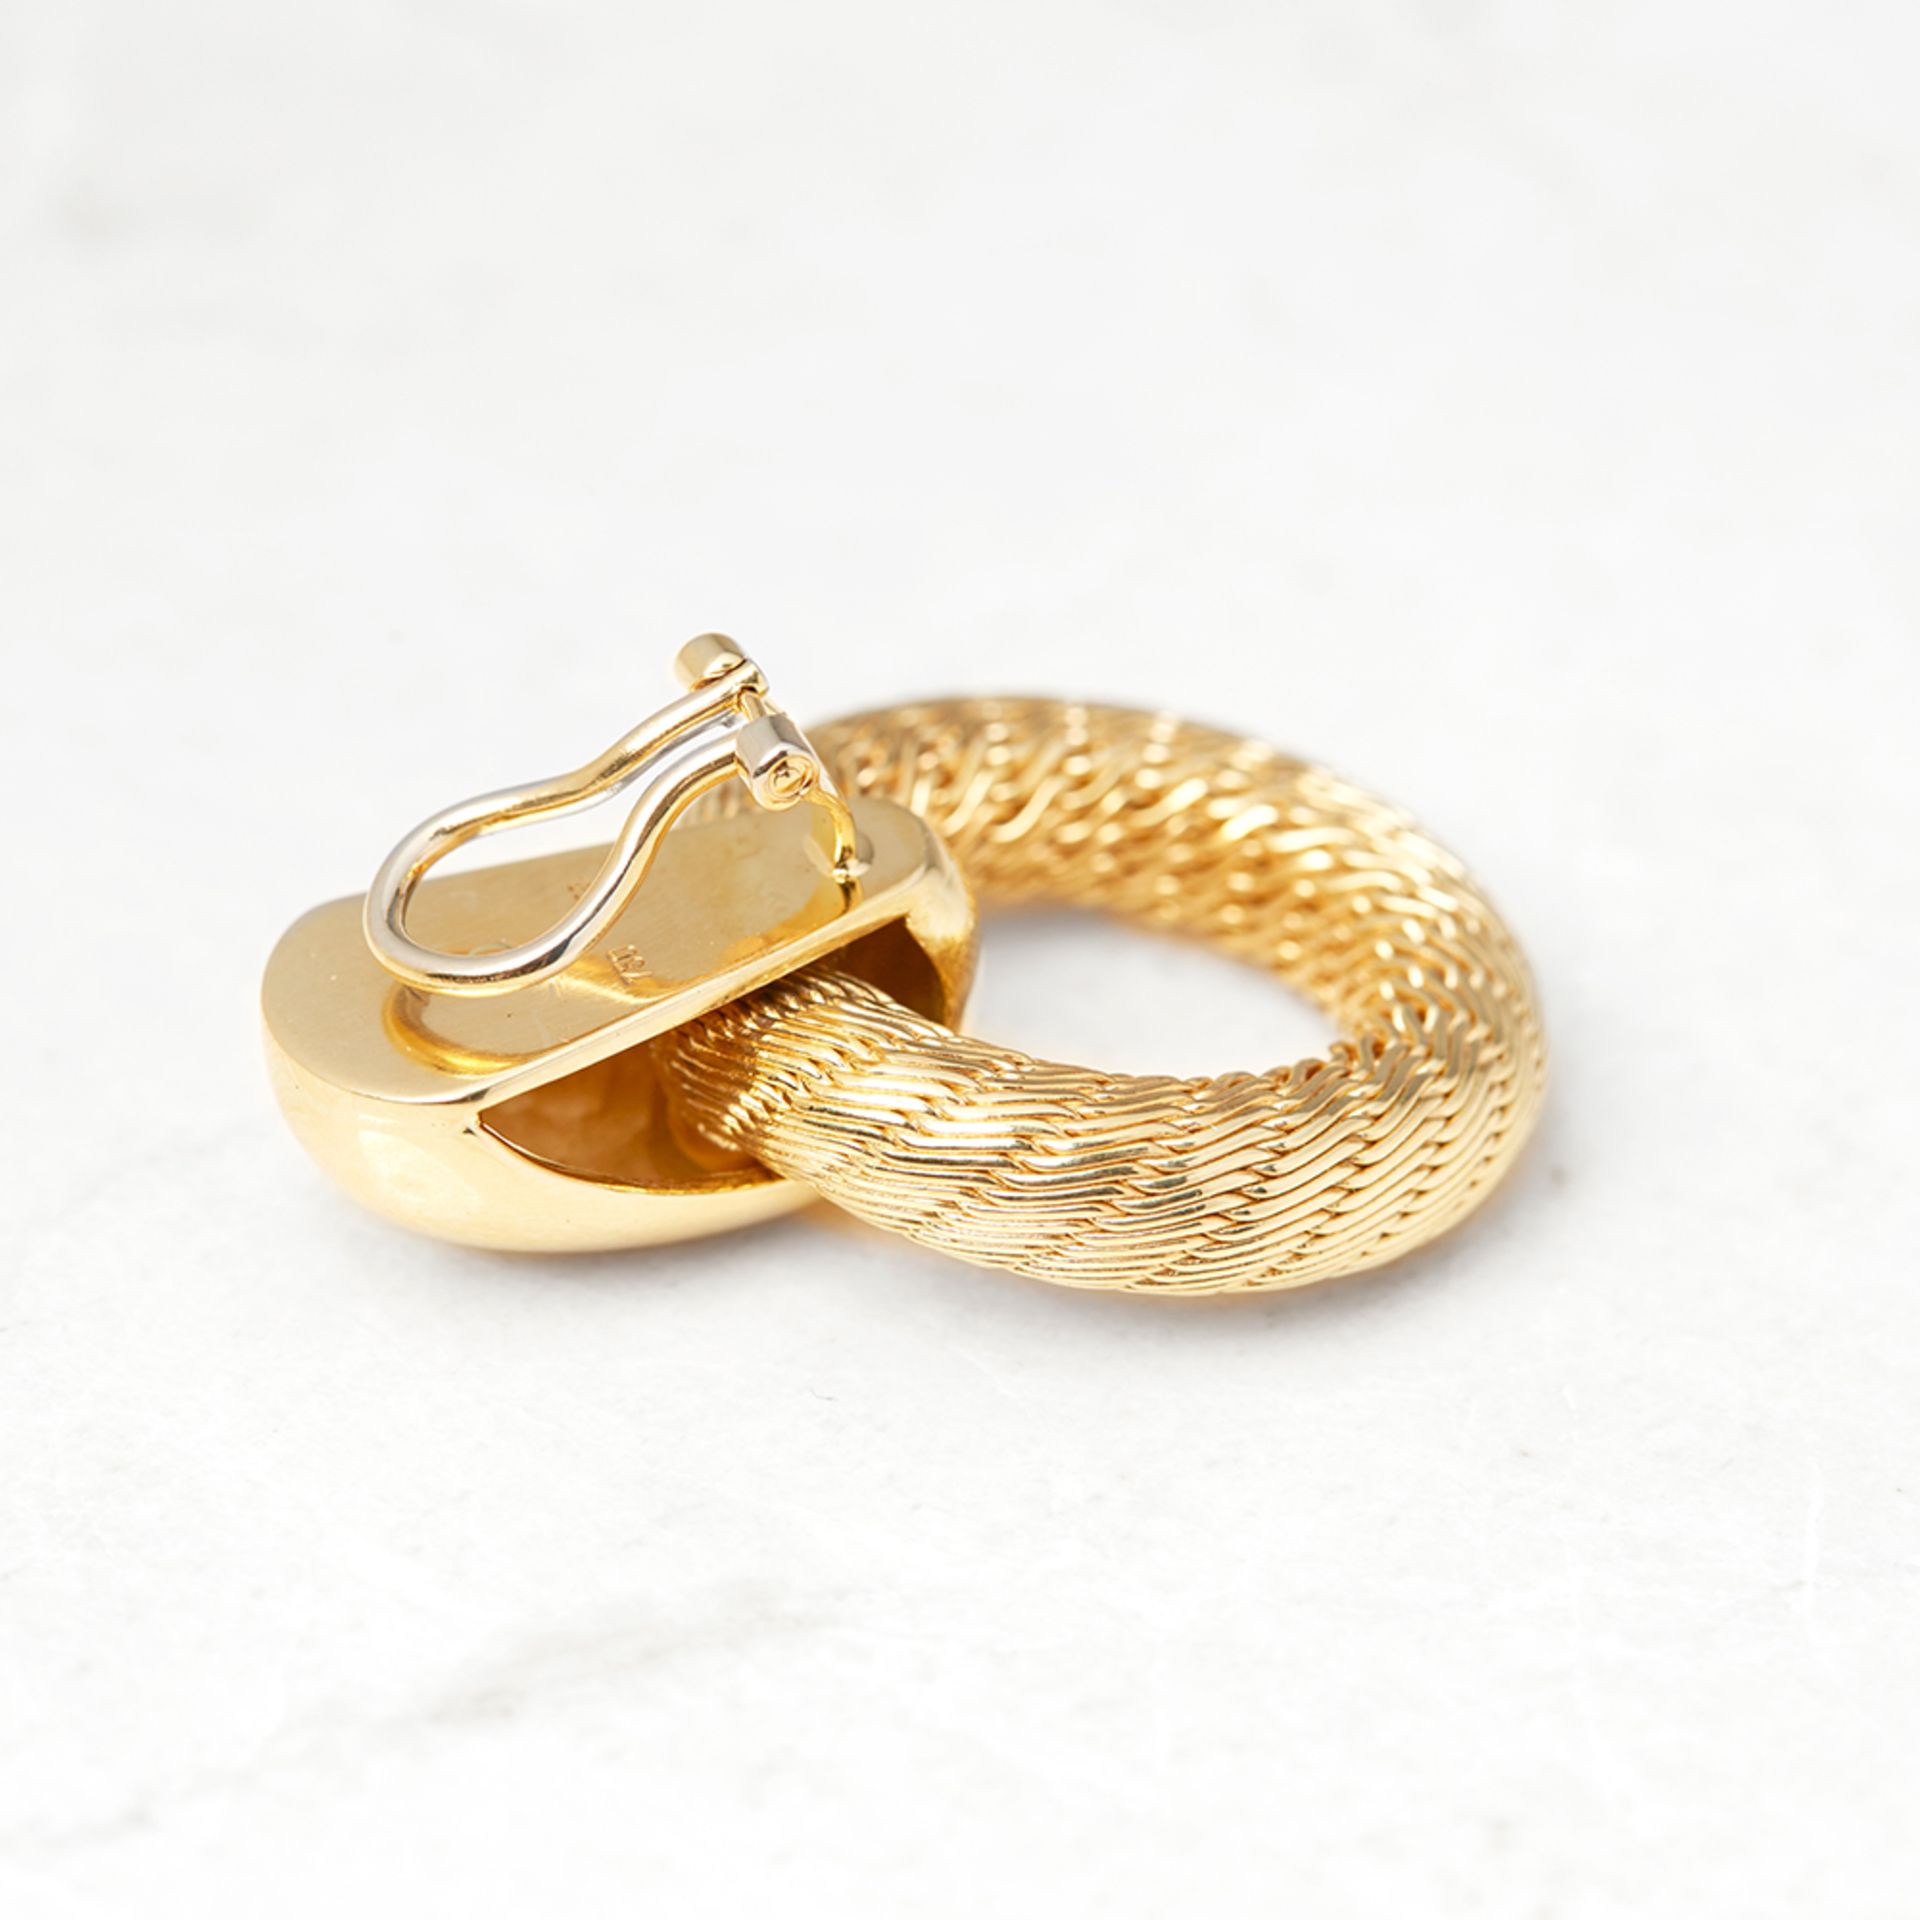 Tiffany & Co. 18k Yellow Gold Woven Hoop Ear Clips - Image 3 of 5